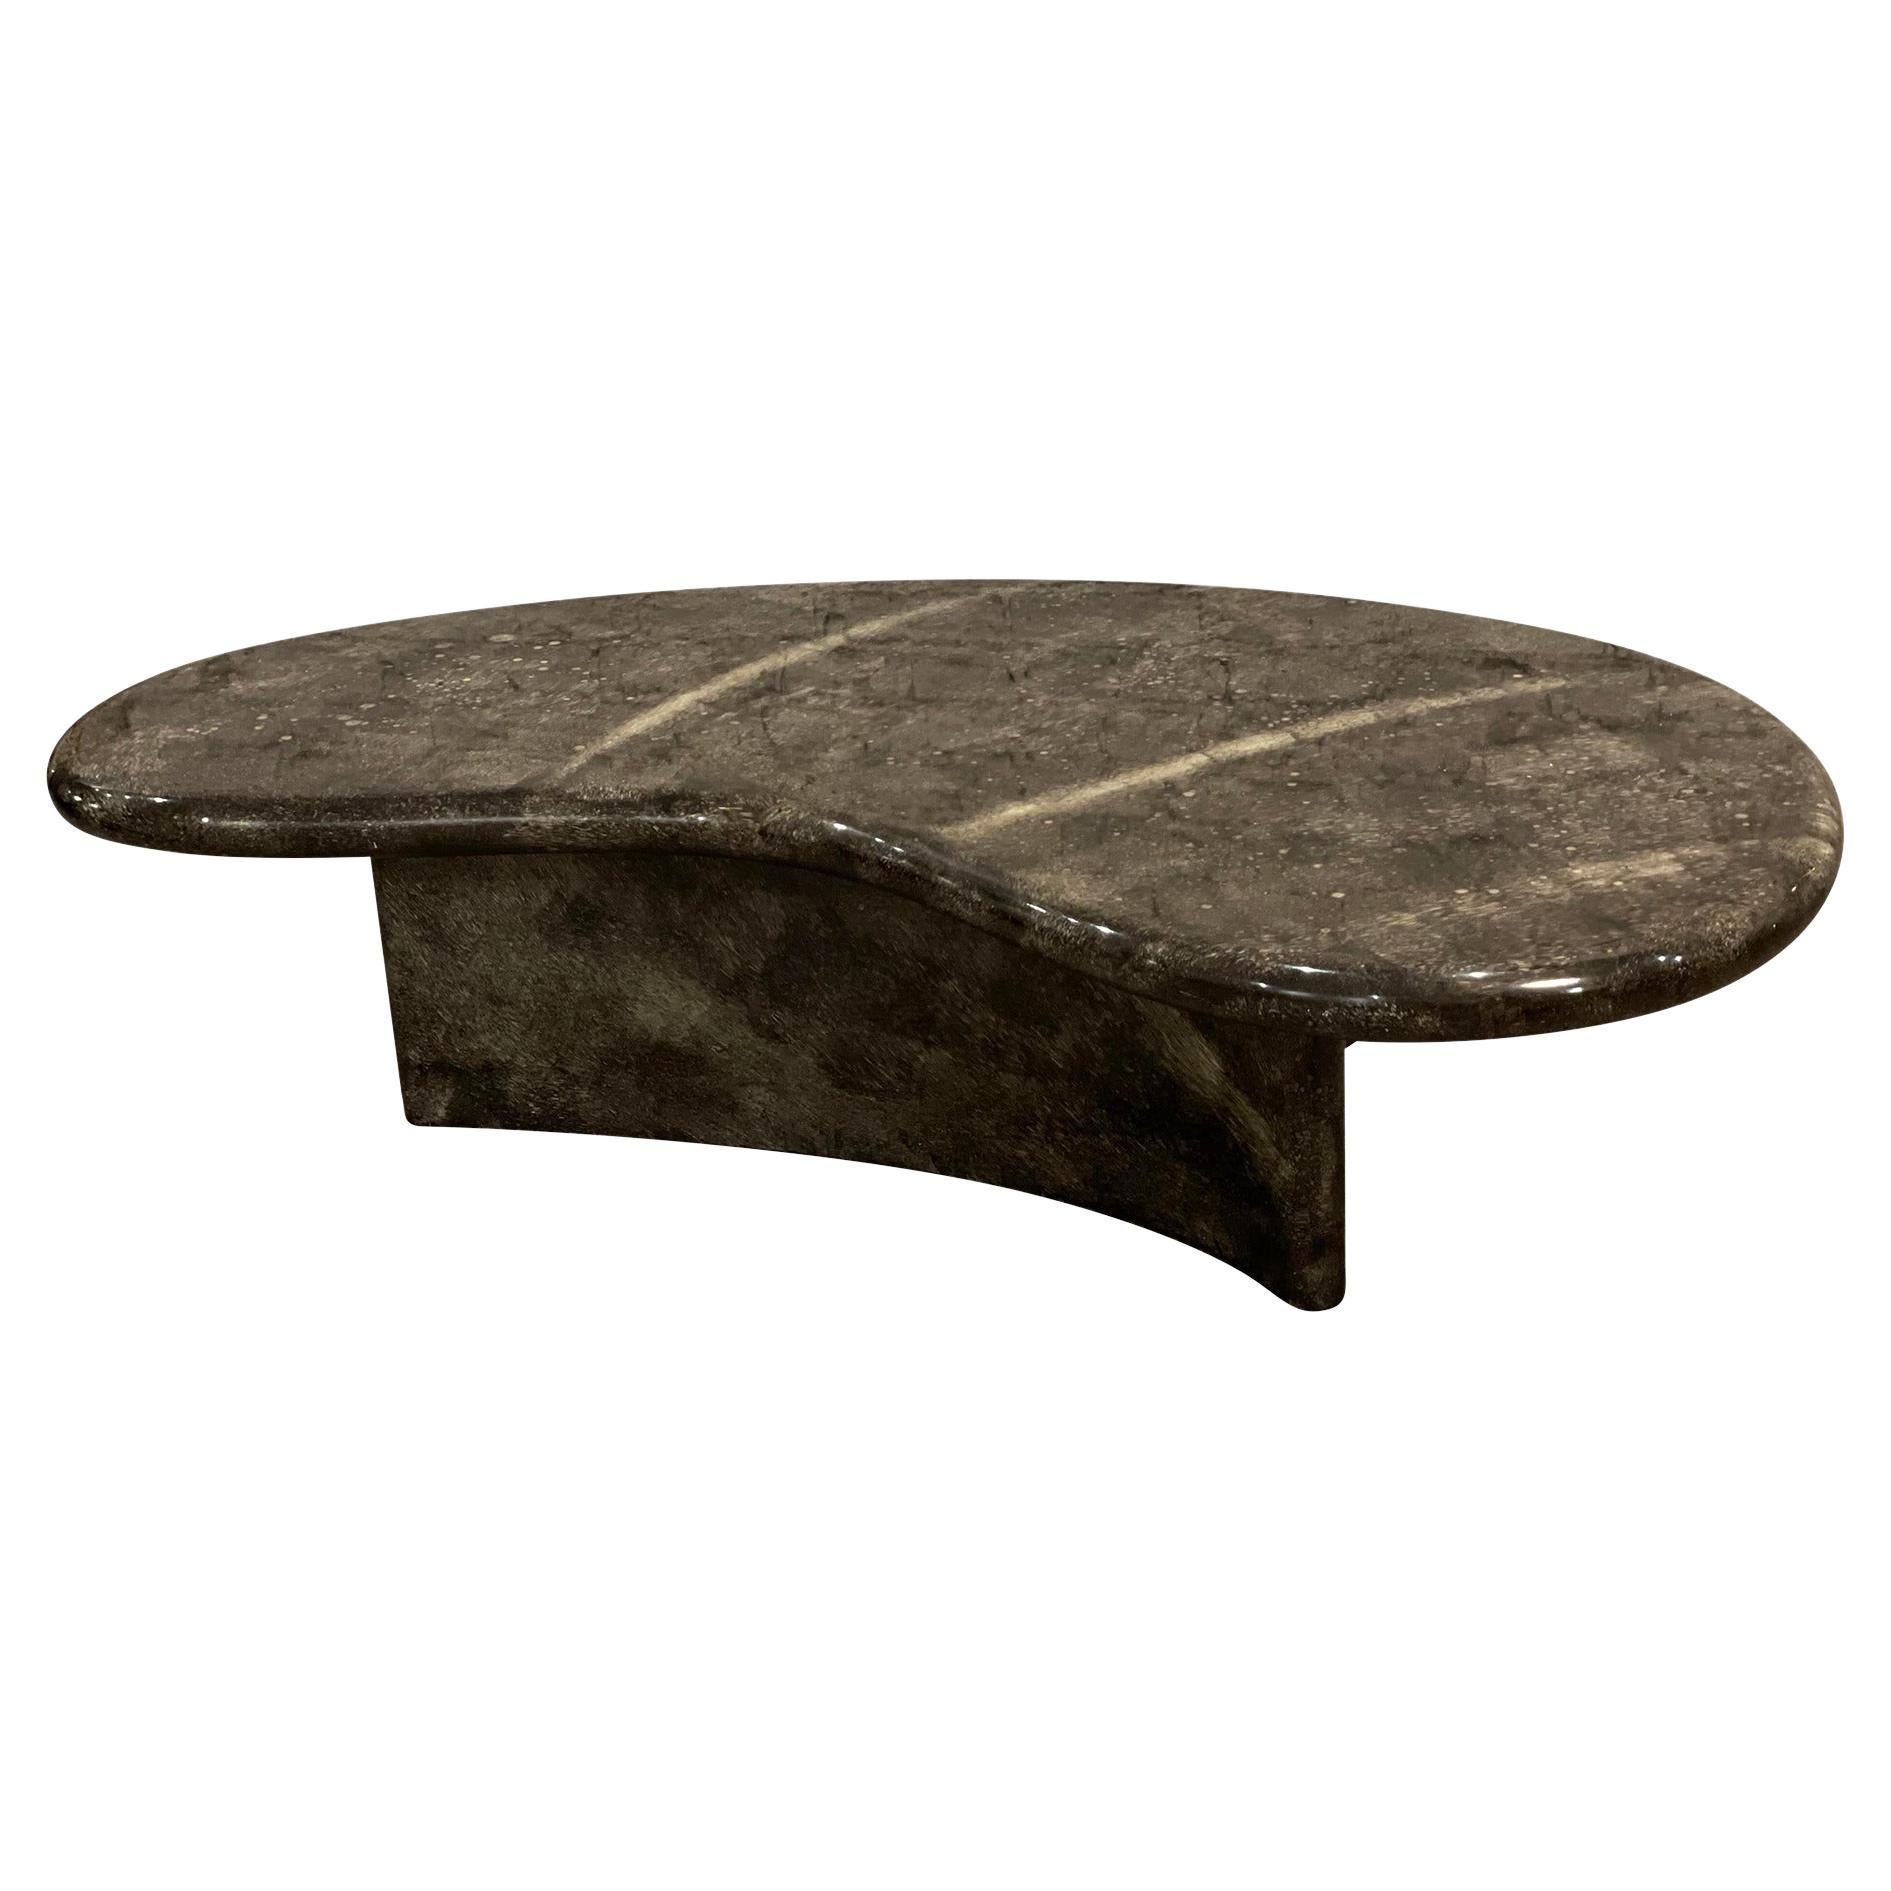 Postmodern Biomorphic Kidney Shape Lacquer Coffee Table